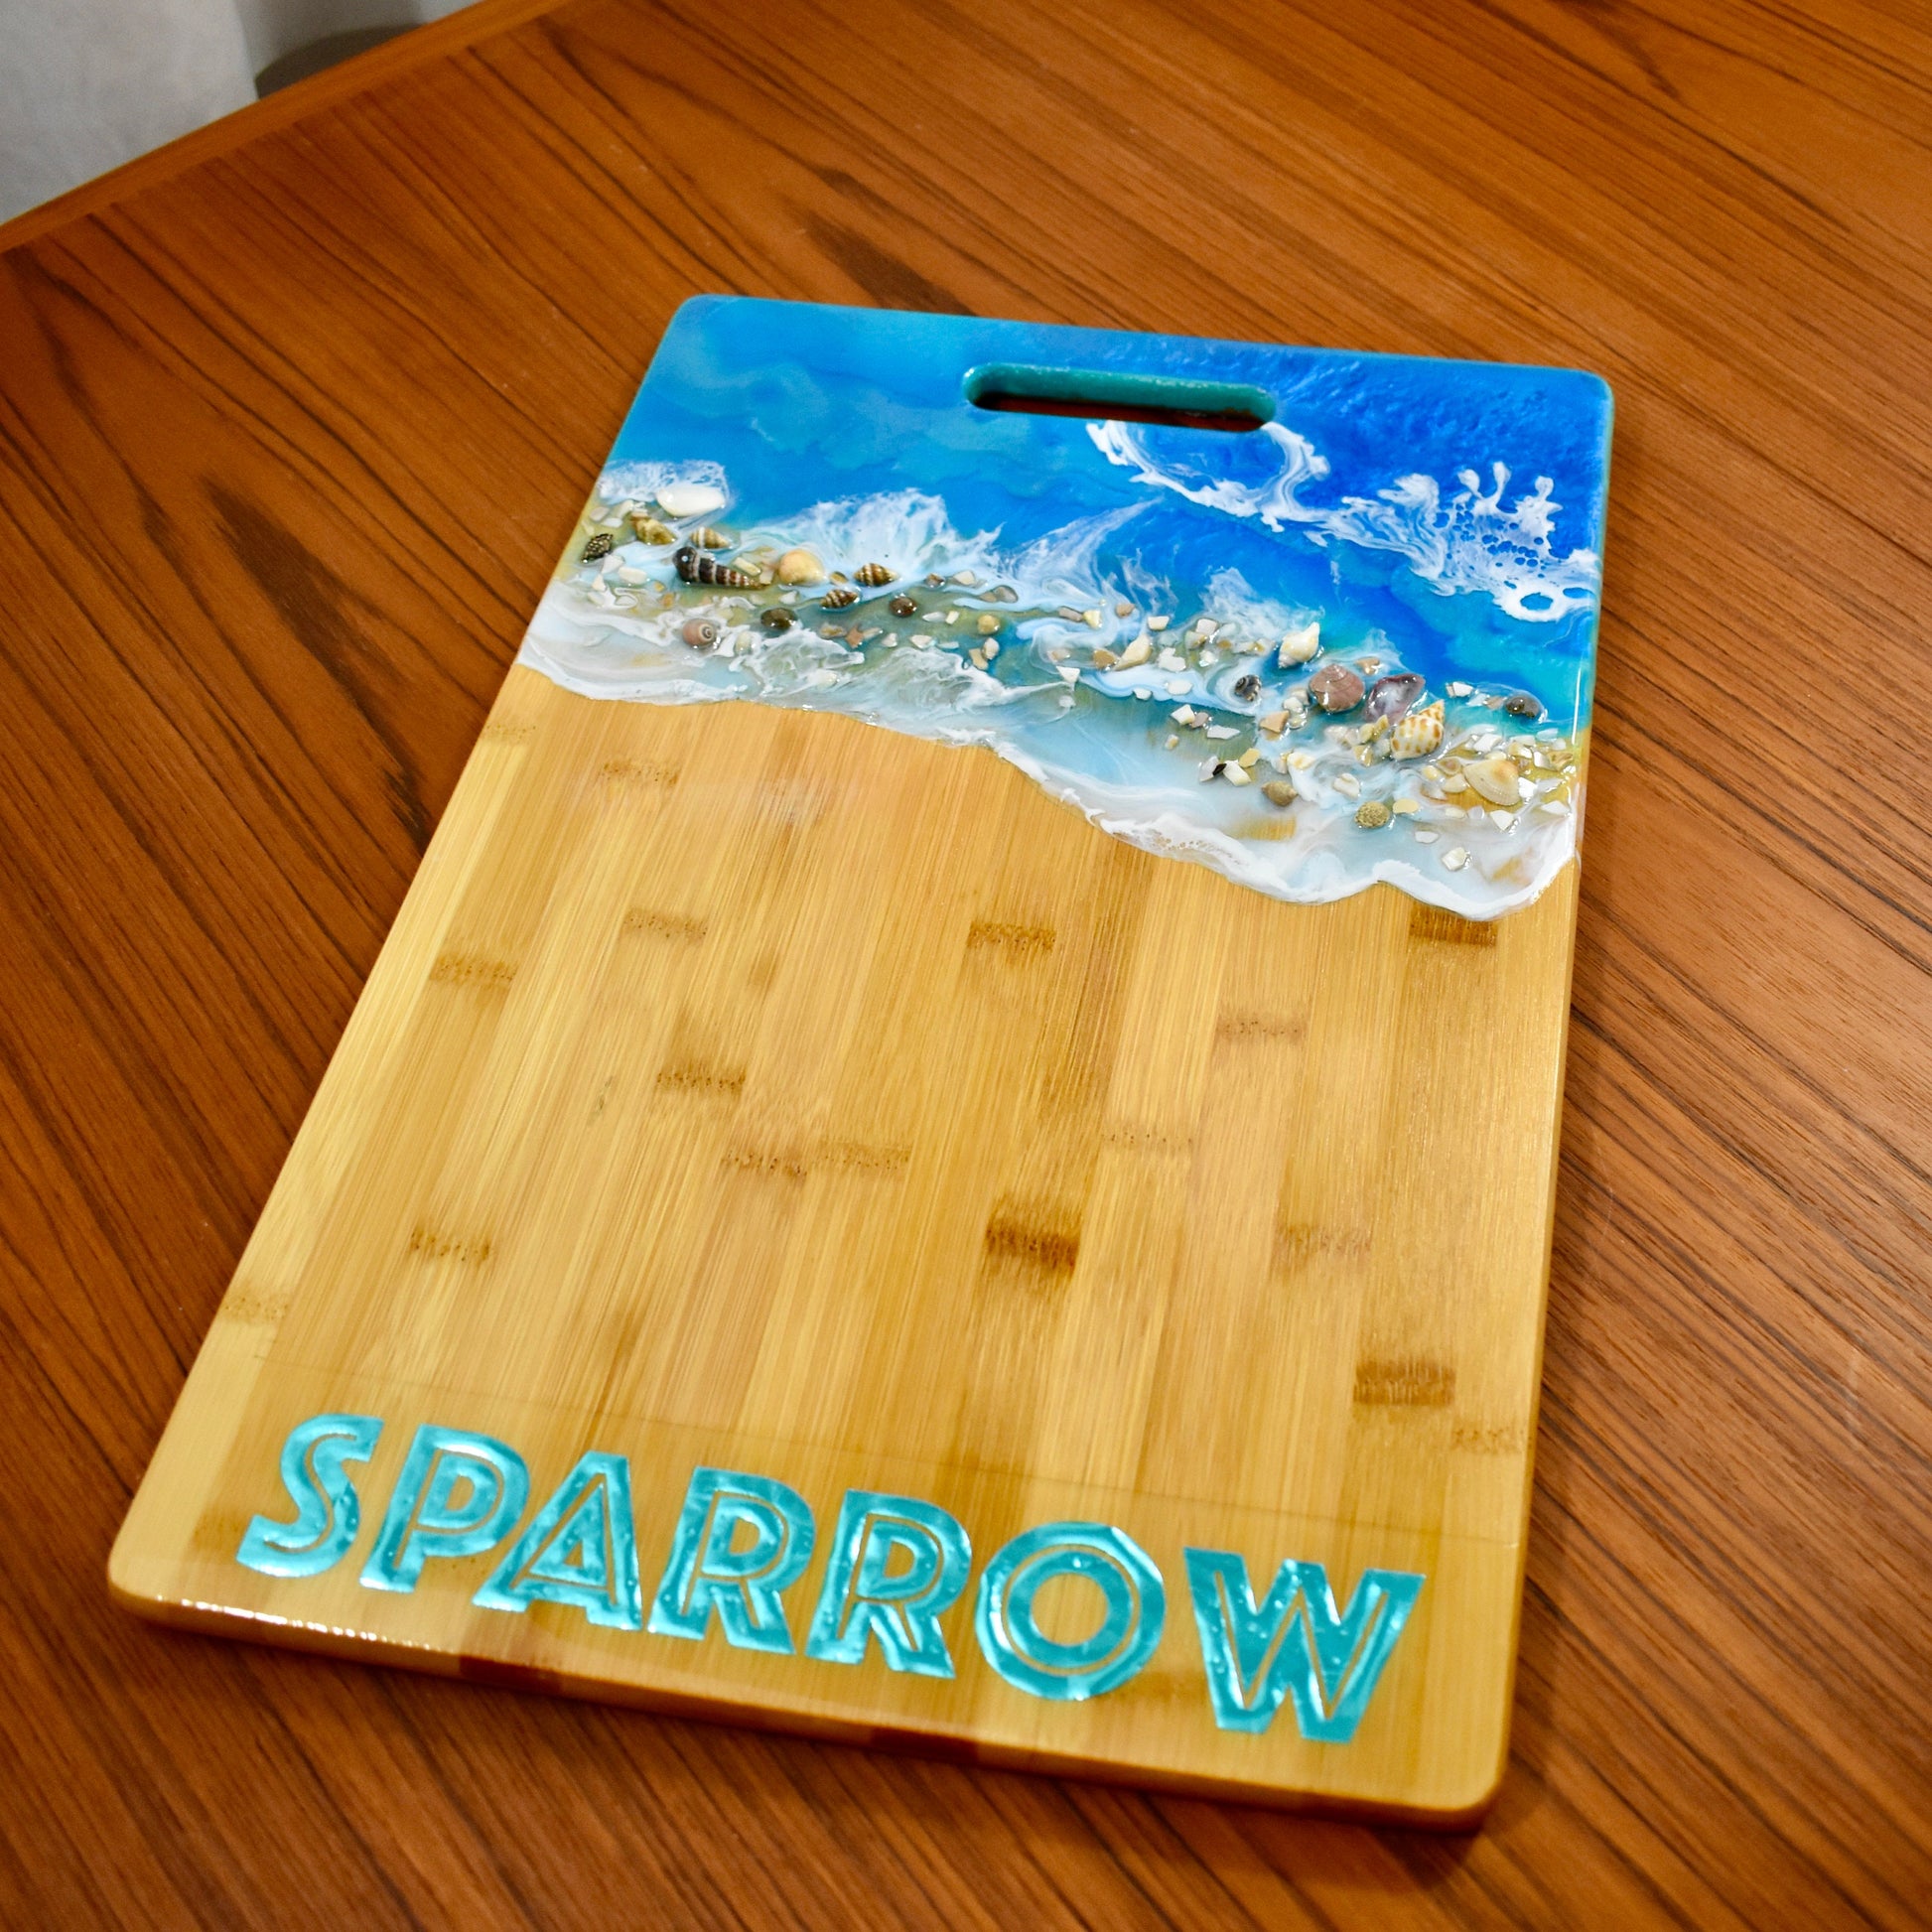 This beach-themed charcuterie board is personalized with the name "Sparrow."